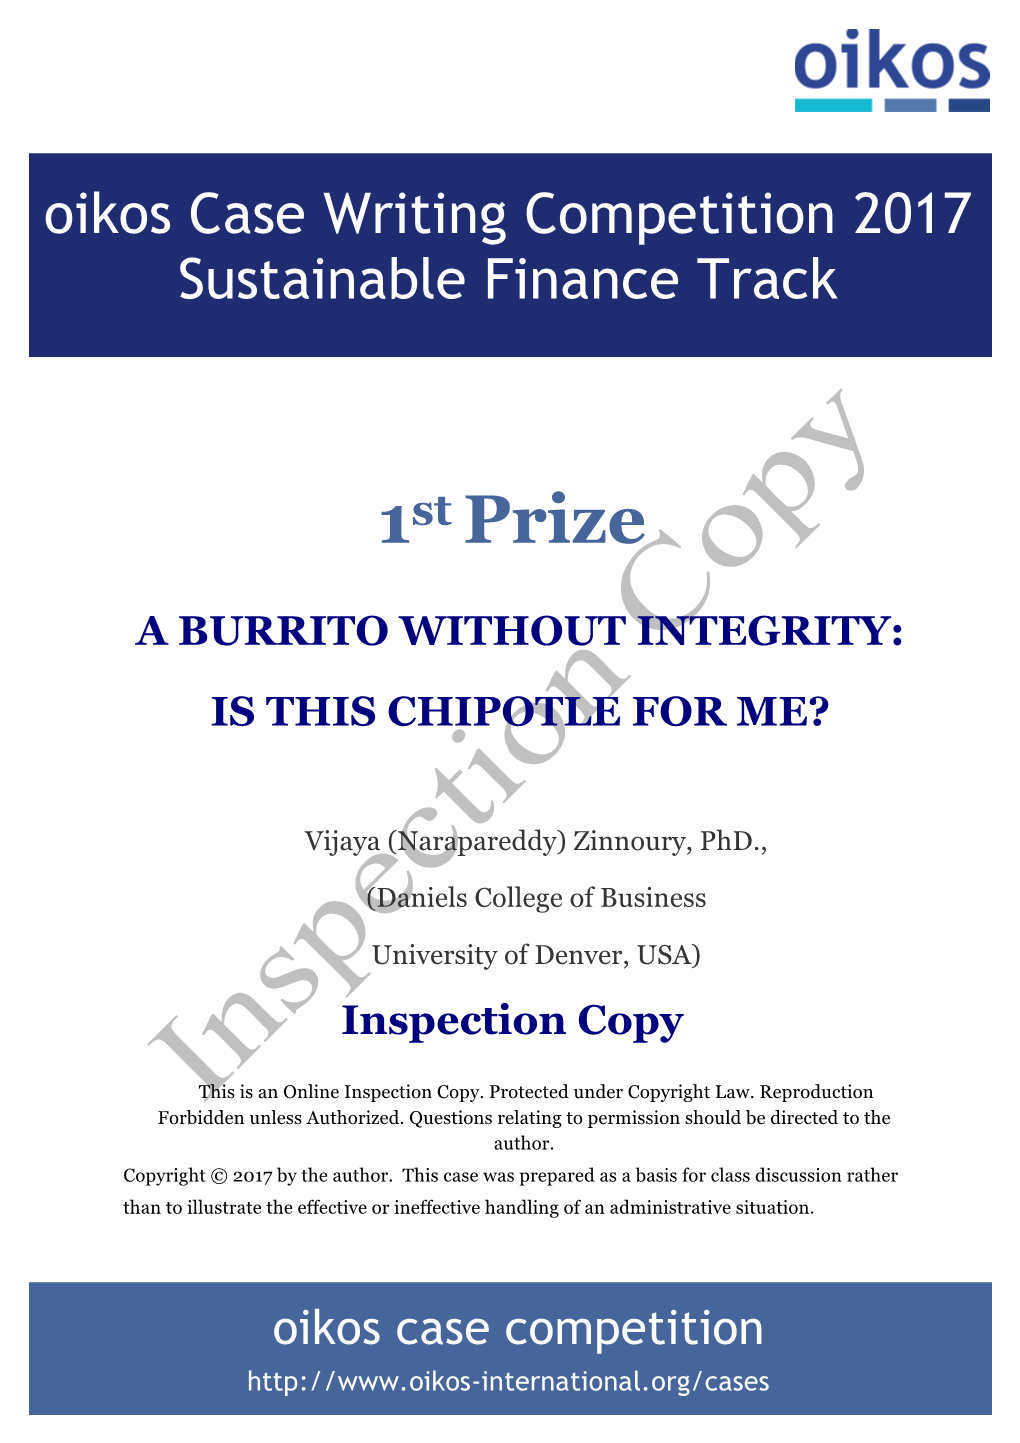 1St Prize a BURRITO WITHOUT INTEGRITY: IS THIS CHIPOTLE FOR